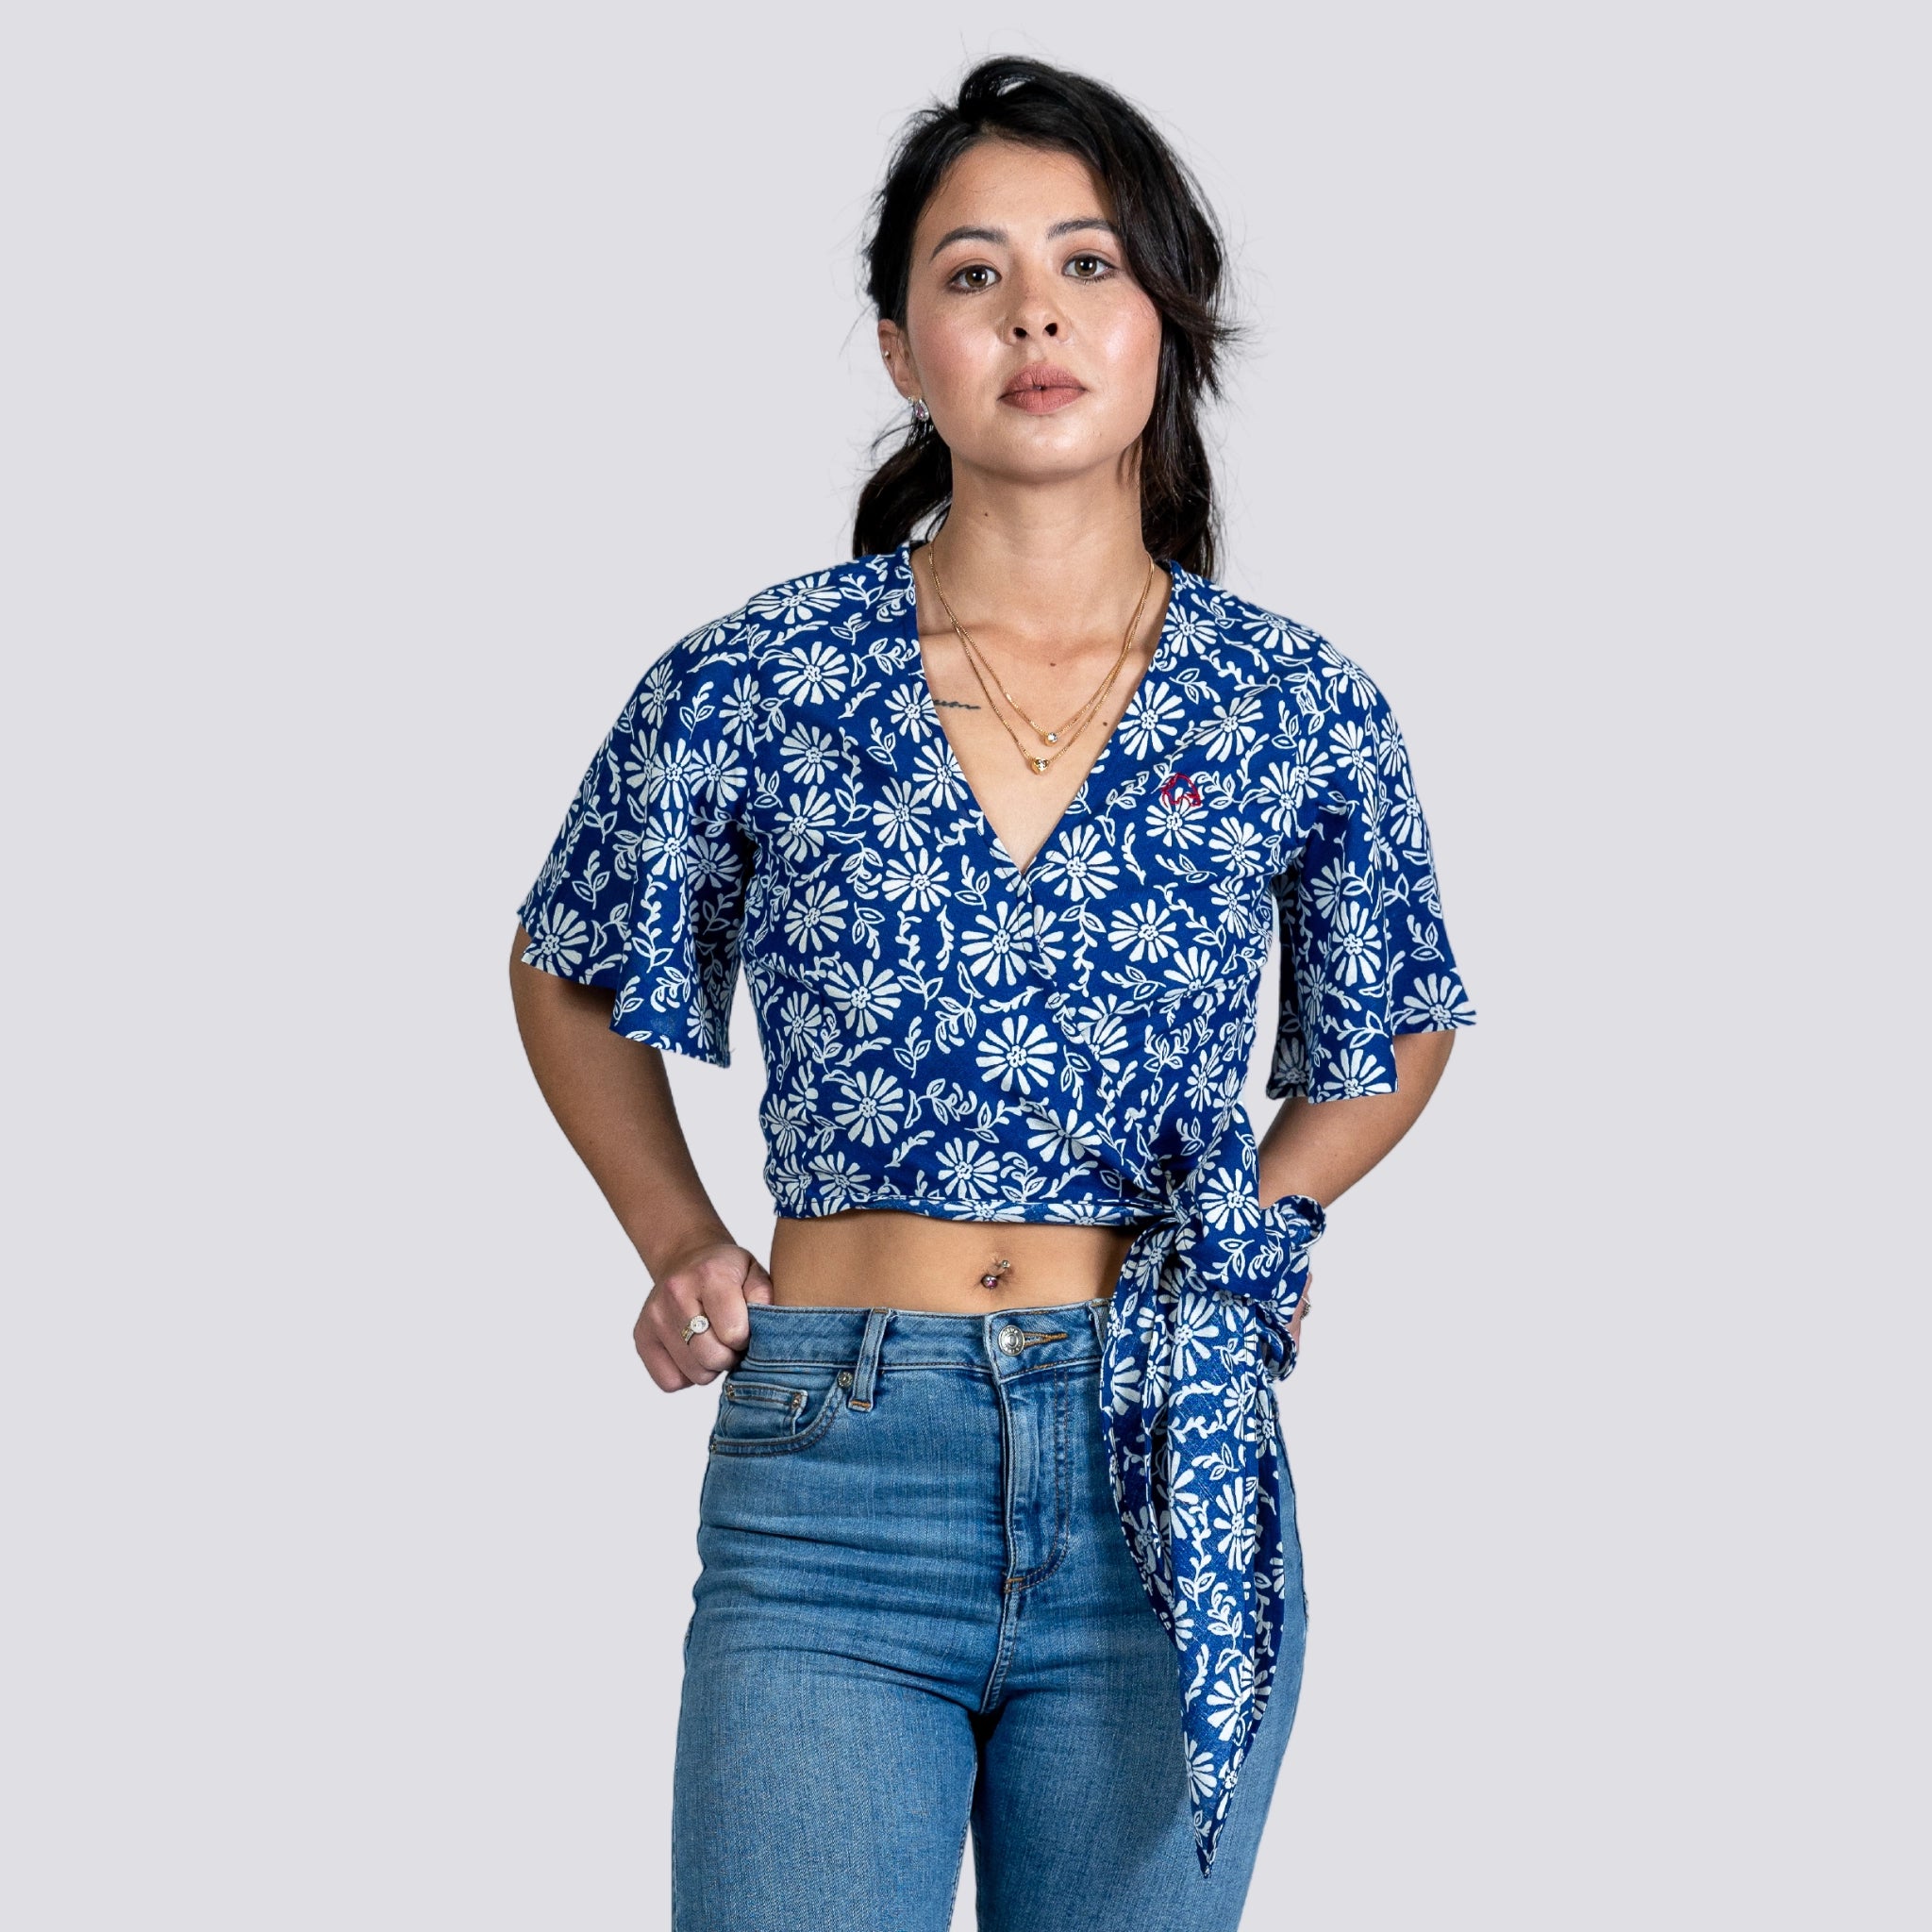 Young woman in a SereneBloom Women's Eco-Friendly Wrap Top - Blue Bliss by Karee and jeans, standing confidently with one hand on her hip, against a light gray background.